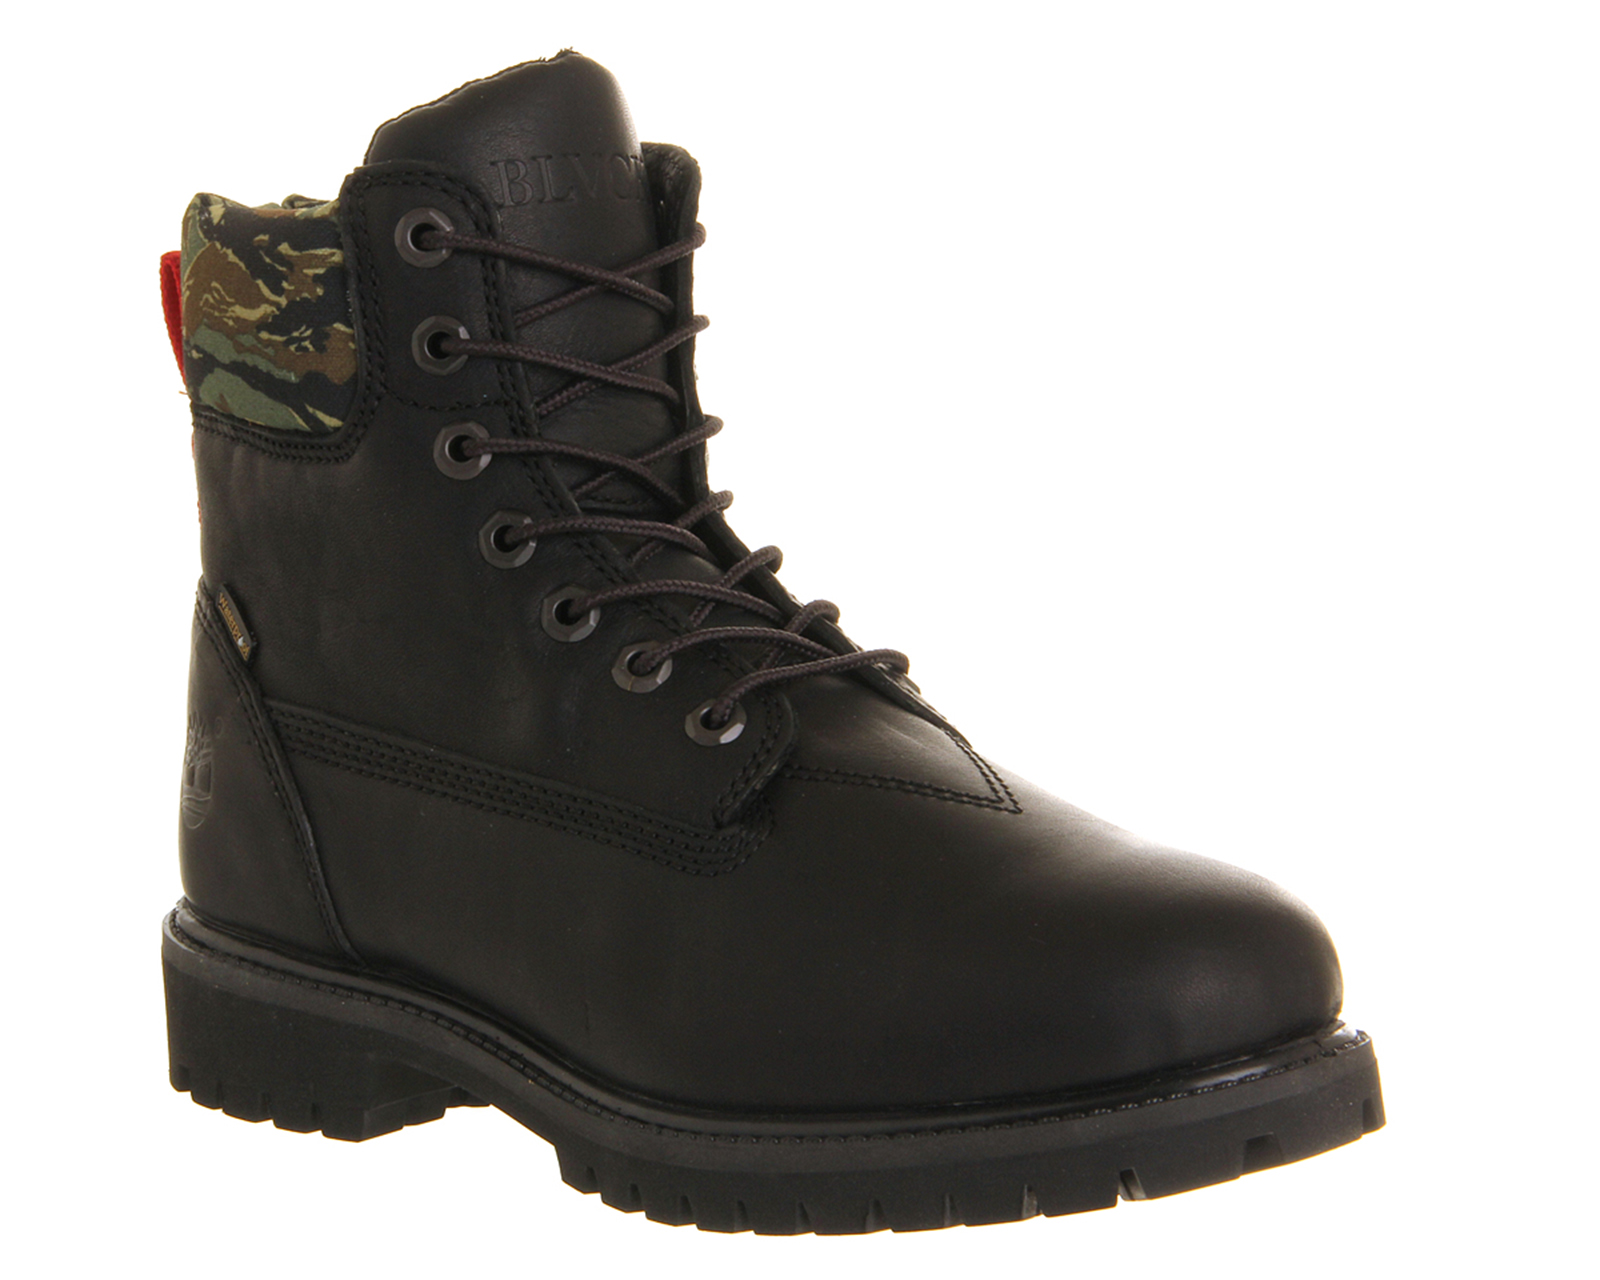 Timberland6 Inch bootsBlack Scale Black Tbl Forty